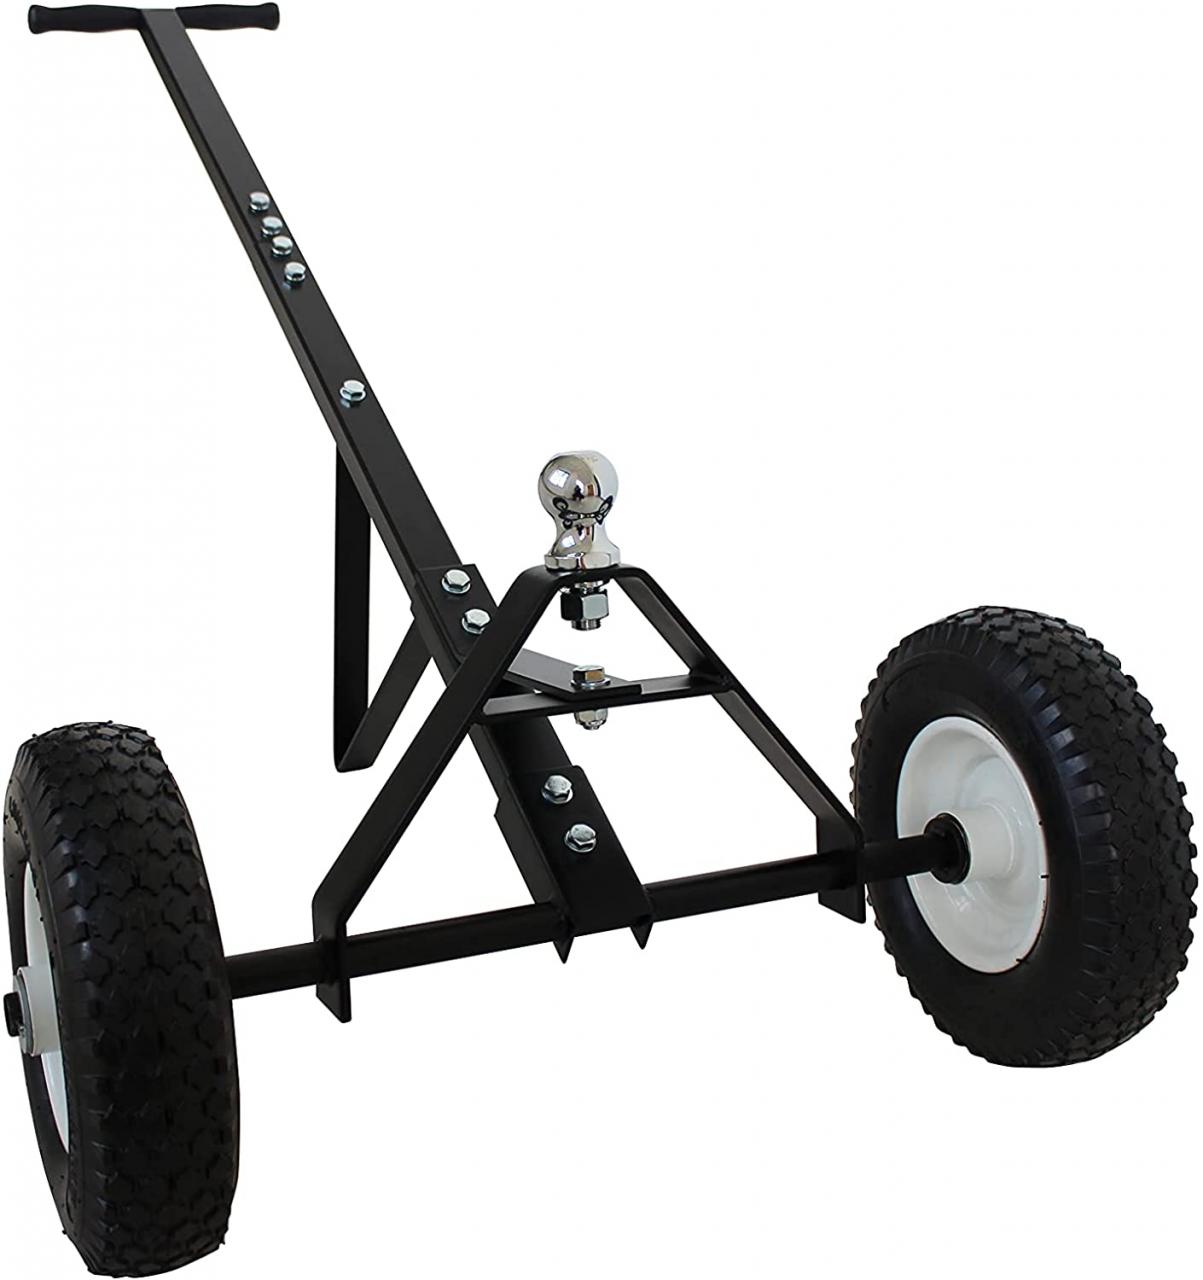 10 Best Trailer Dolly Review and Complete Guide - A New Way Forward |  Automotive and Home Advice & Review